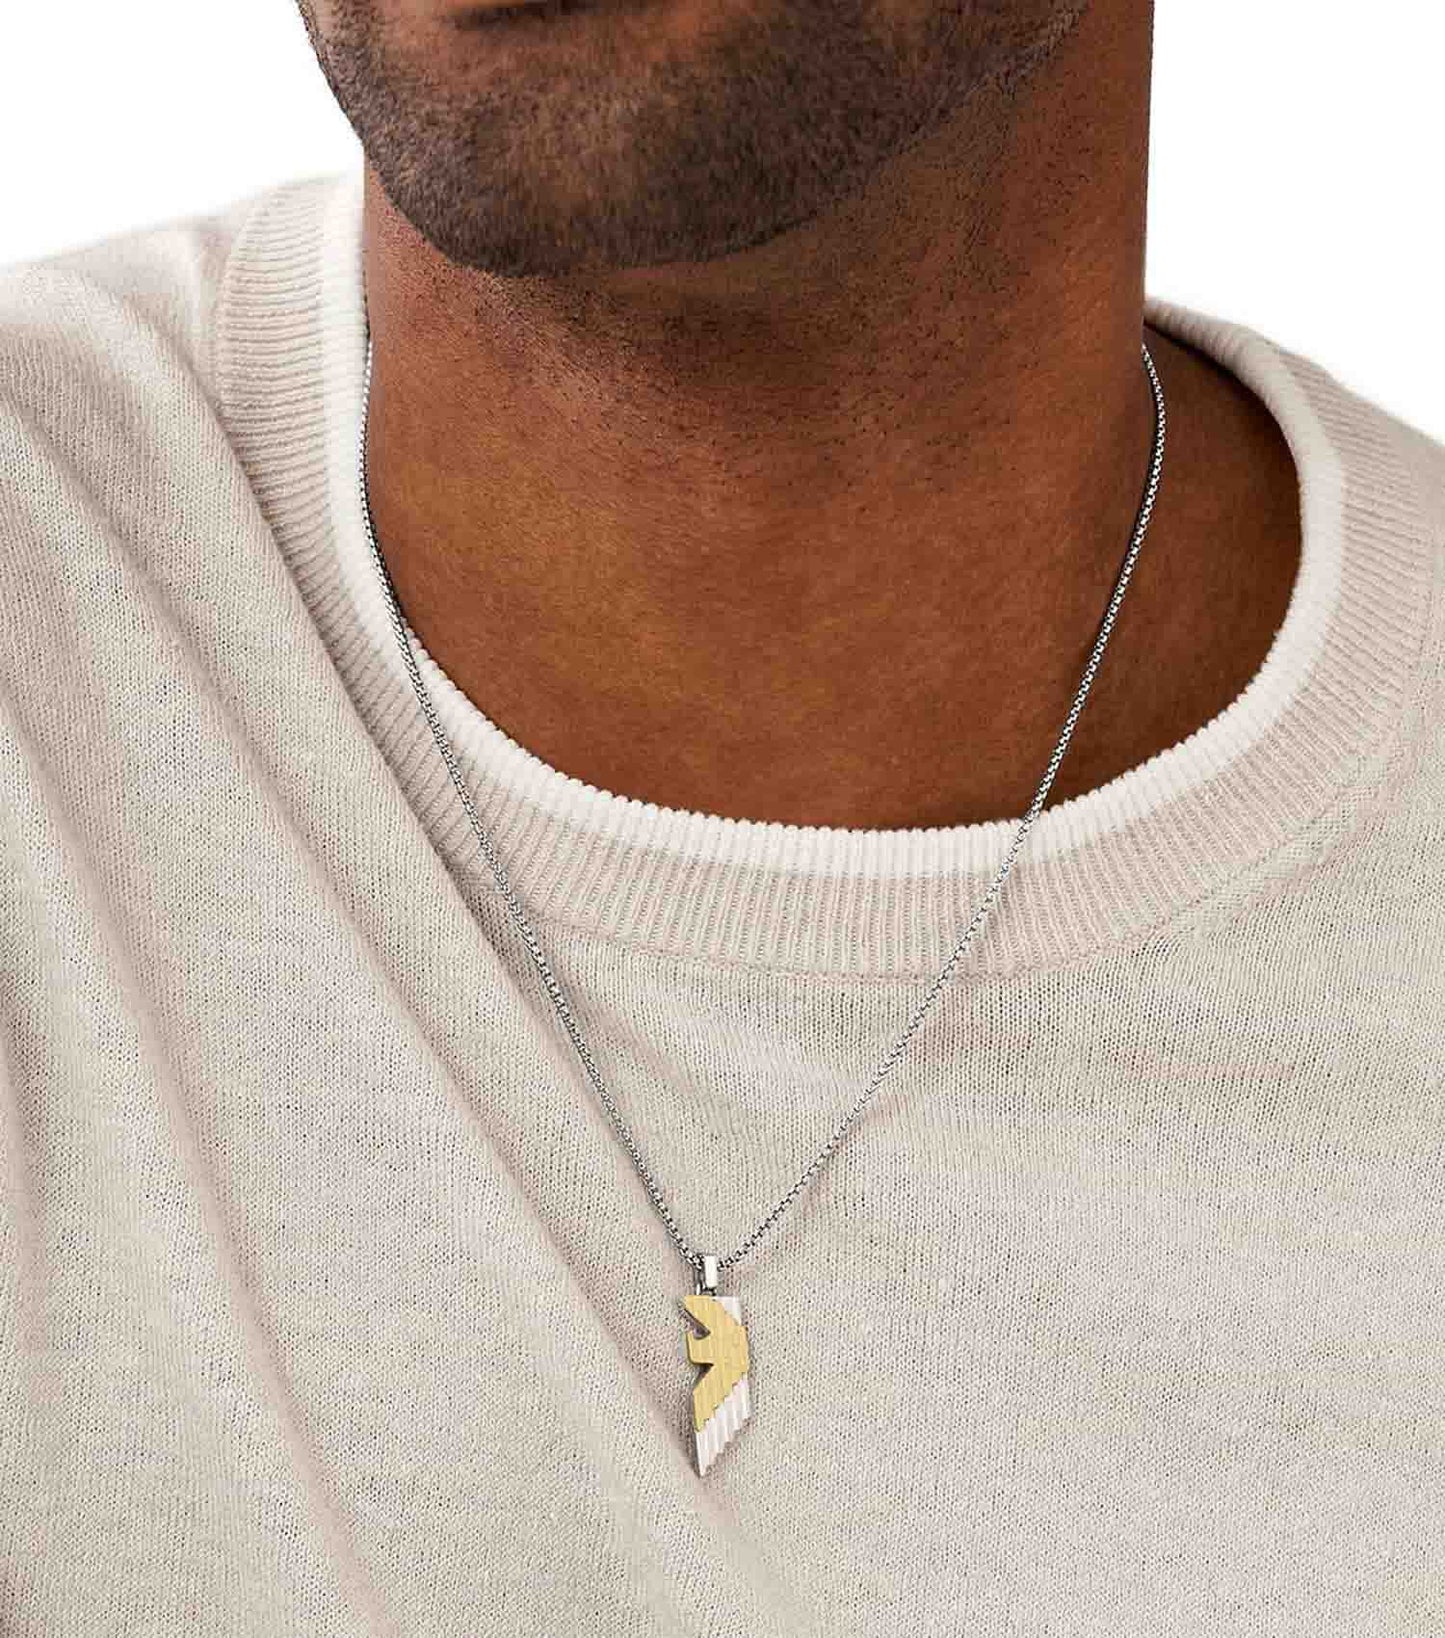 Men Eagle Logo Necklace Silver Stainless Steel